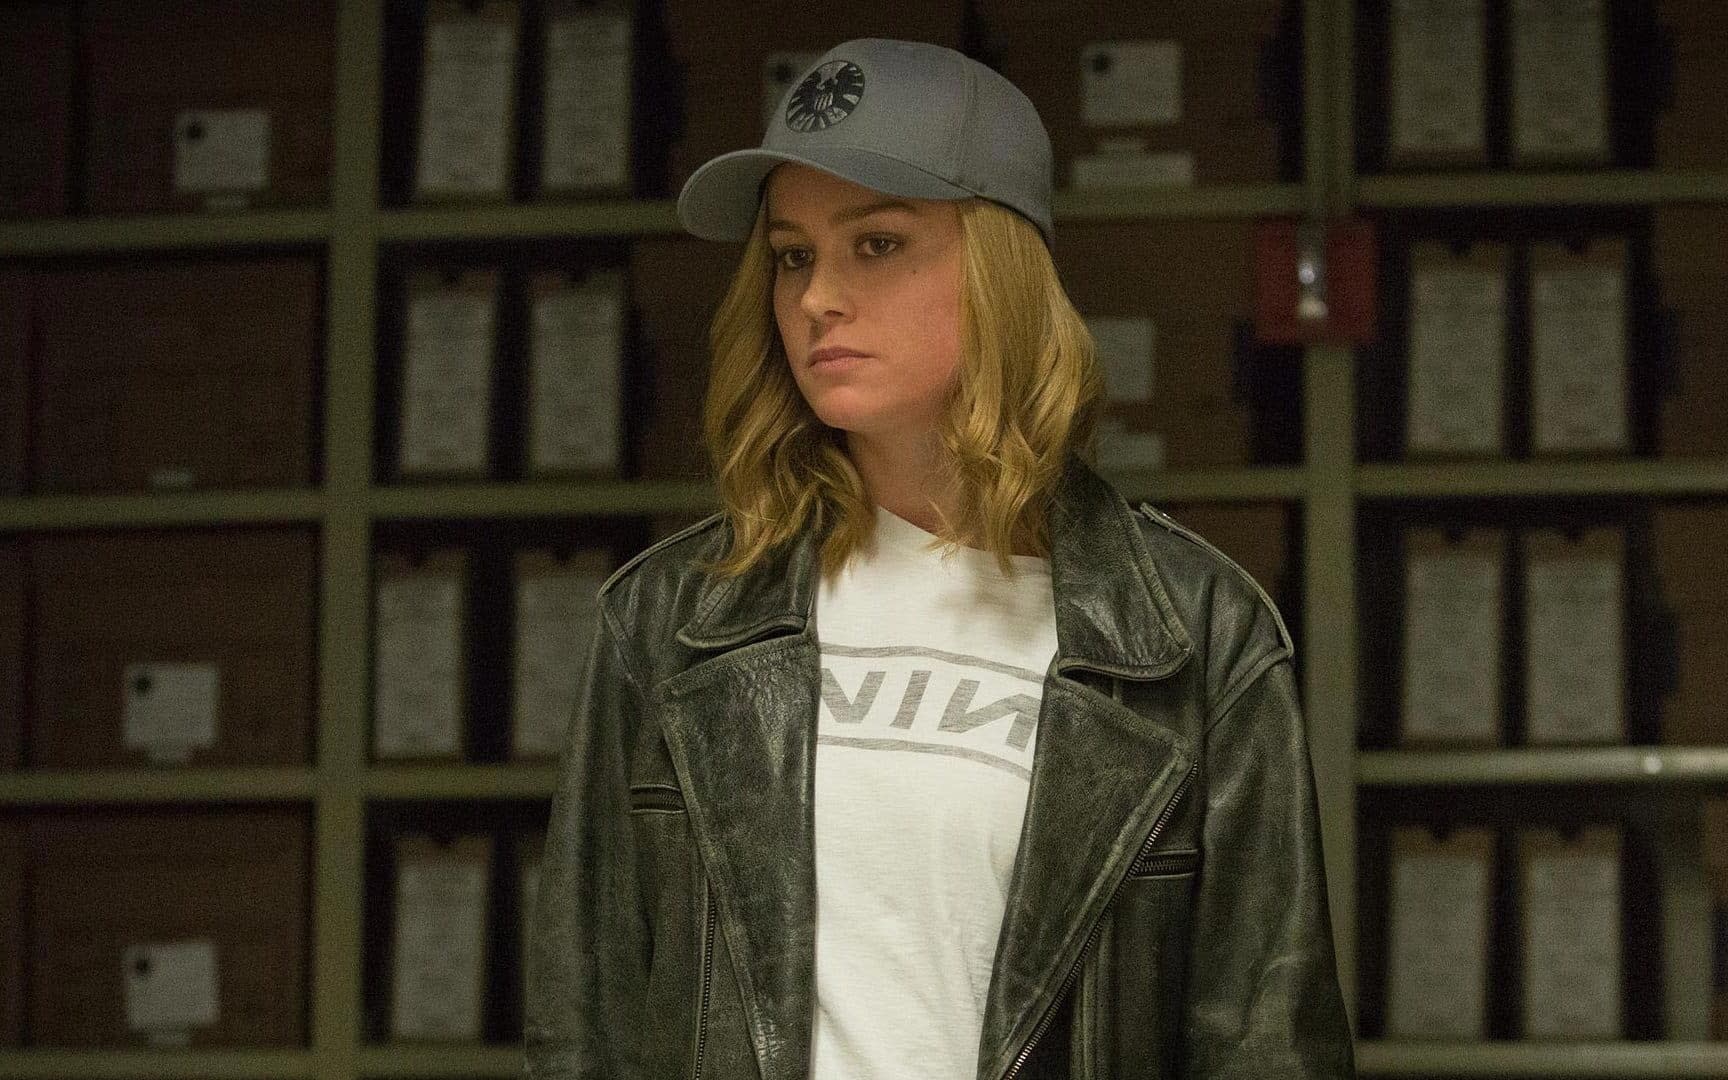 Captain Marvel Now Ranks 3rd in Pre-Sales Out of all the Marvel Movies